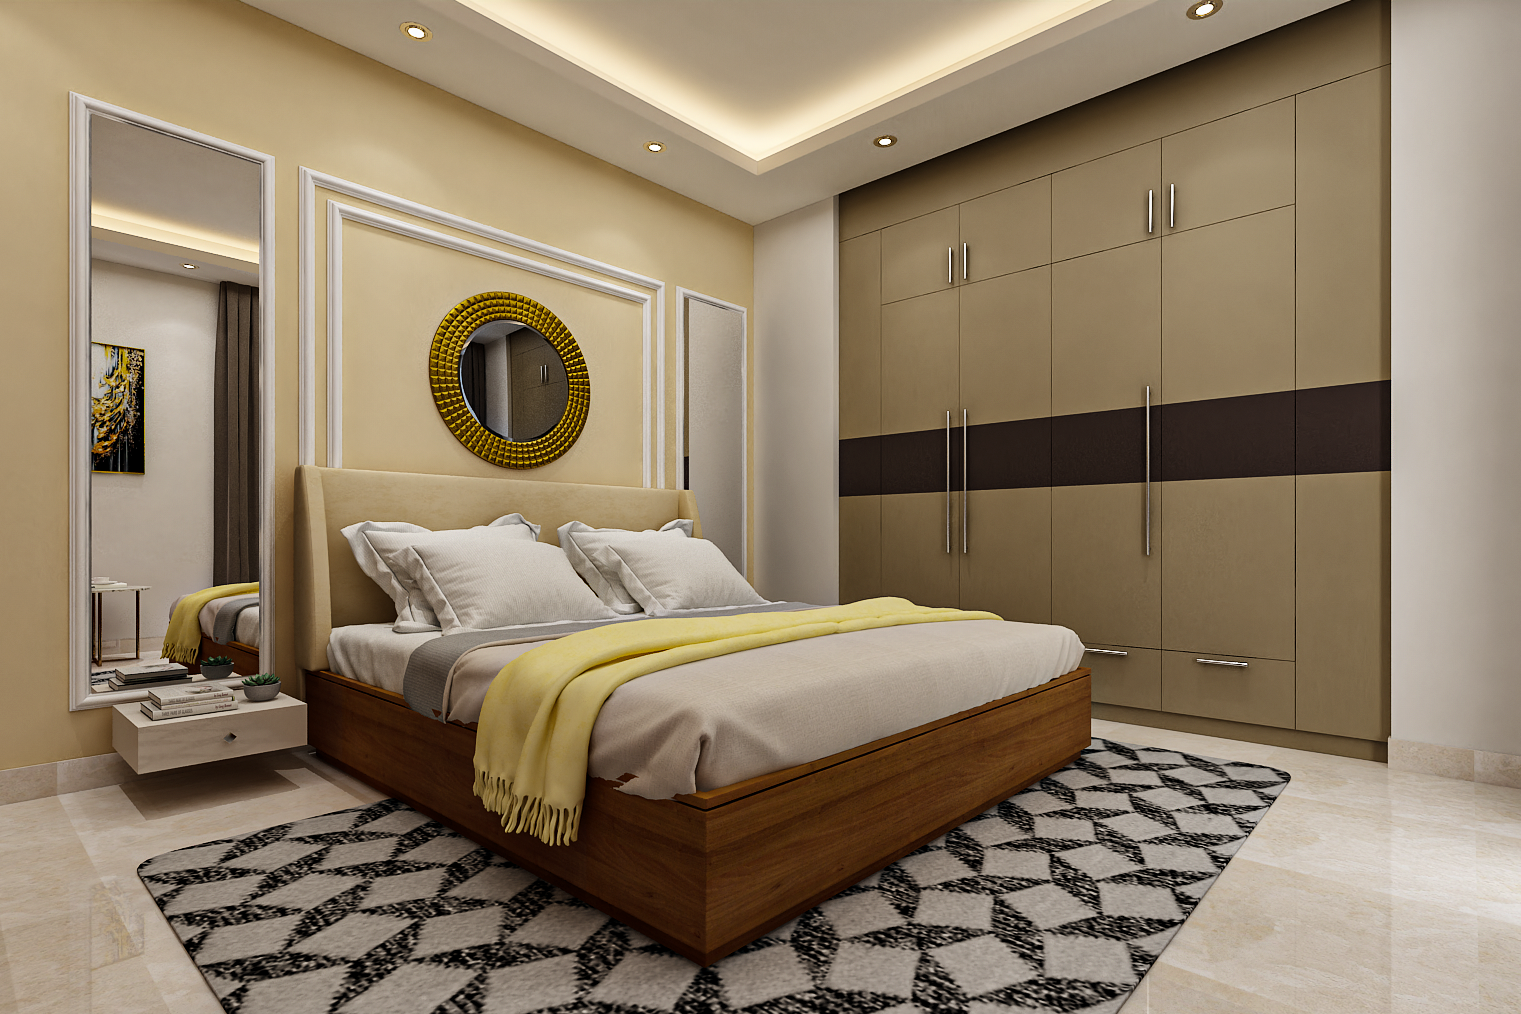 Modern Master Bedroom Design With White Trims And Circular Mirror ...